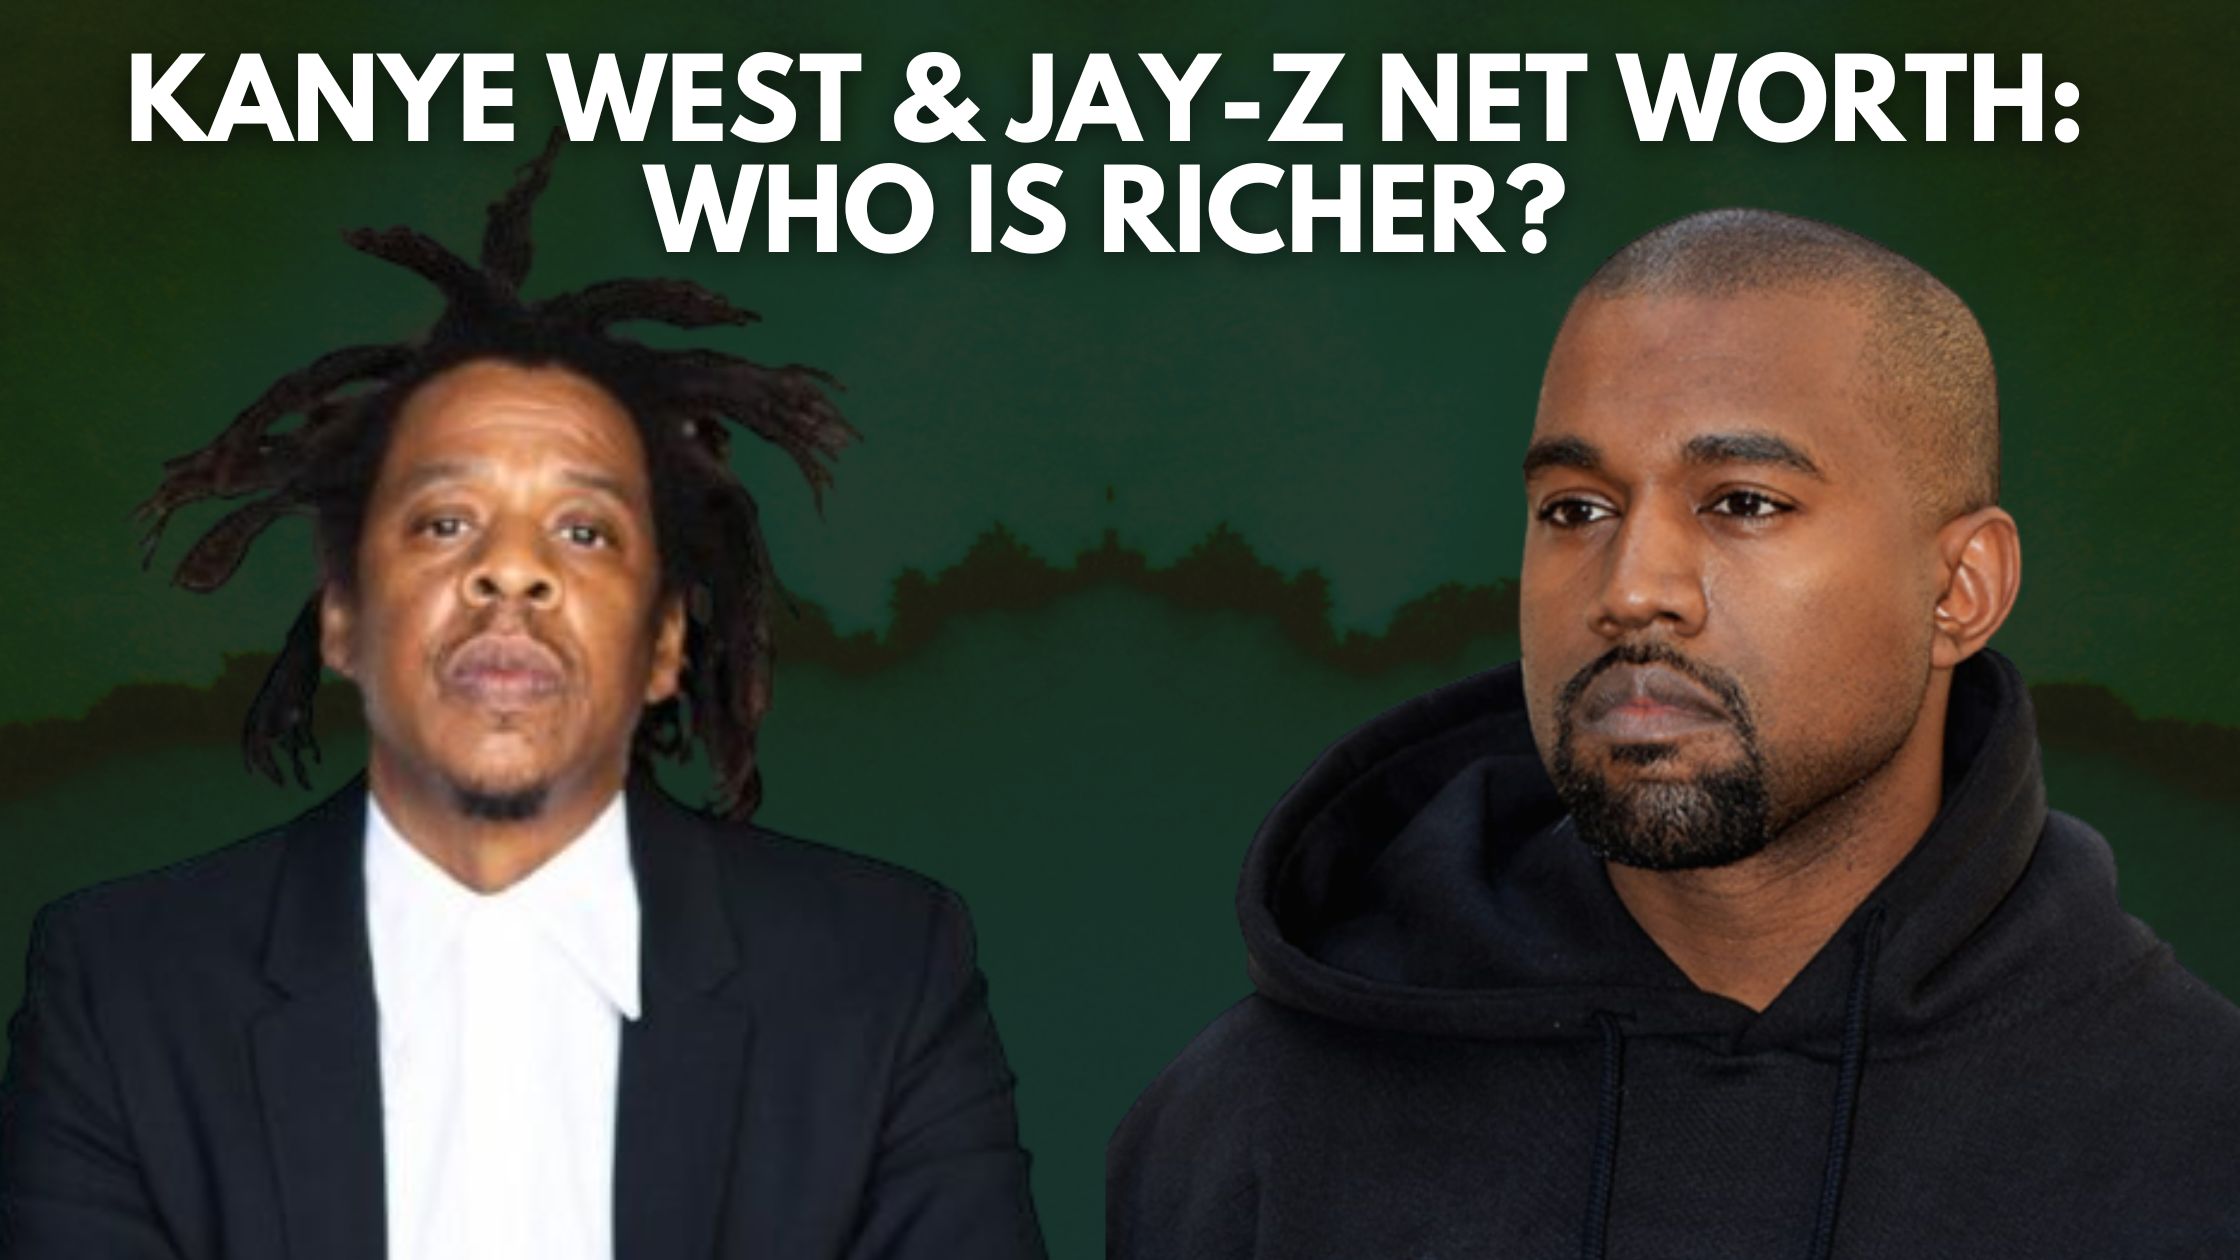 Kanye West and Jay Z Net Worth: Who is Richer?